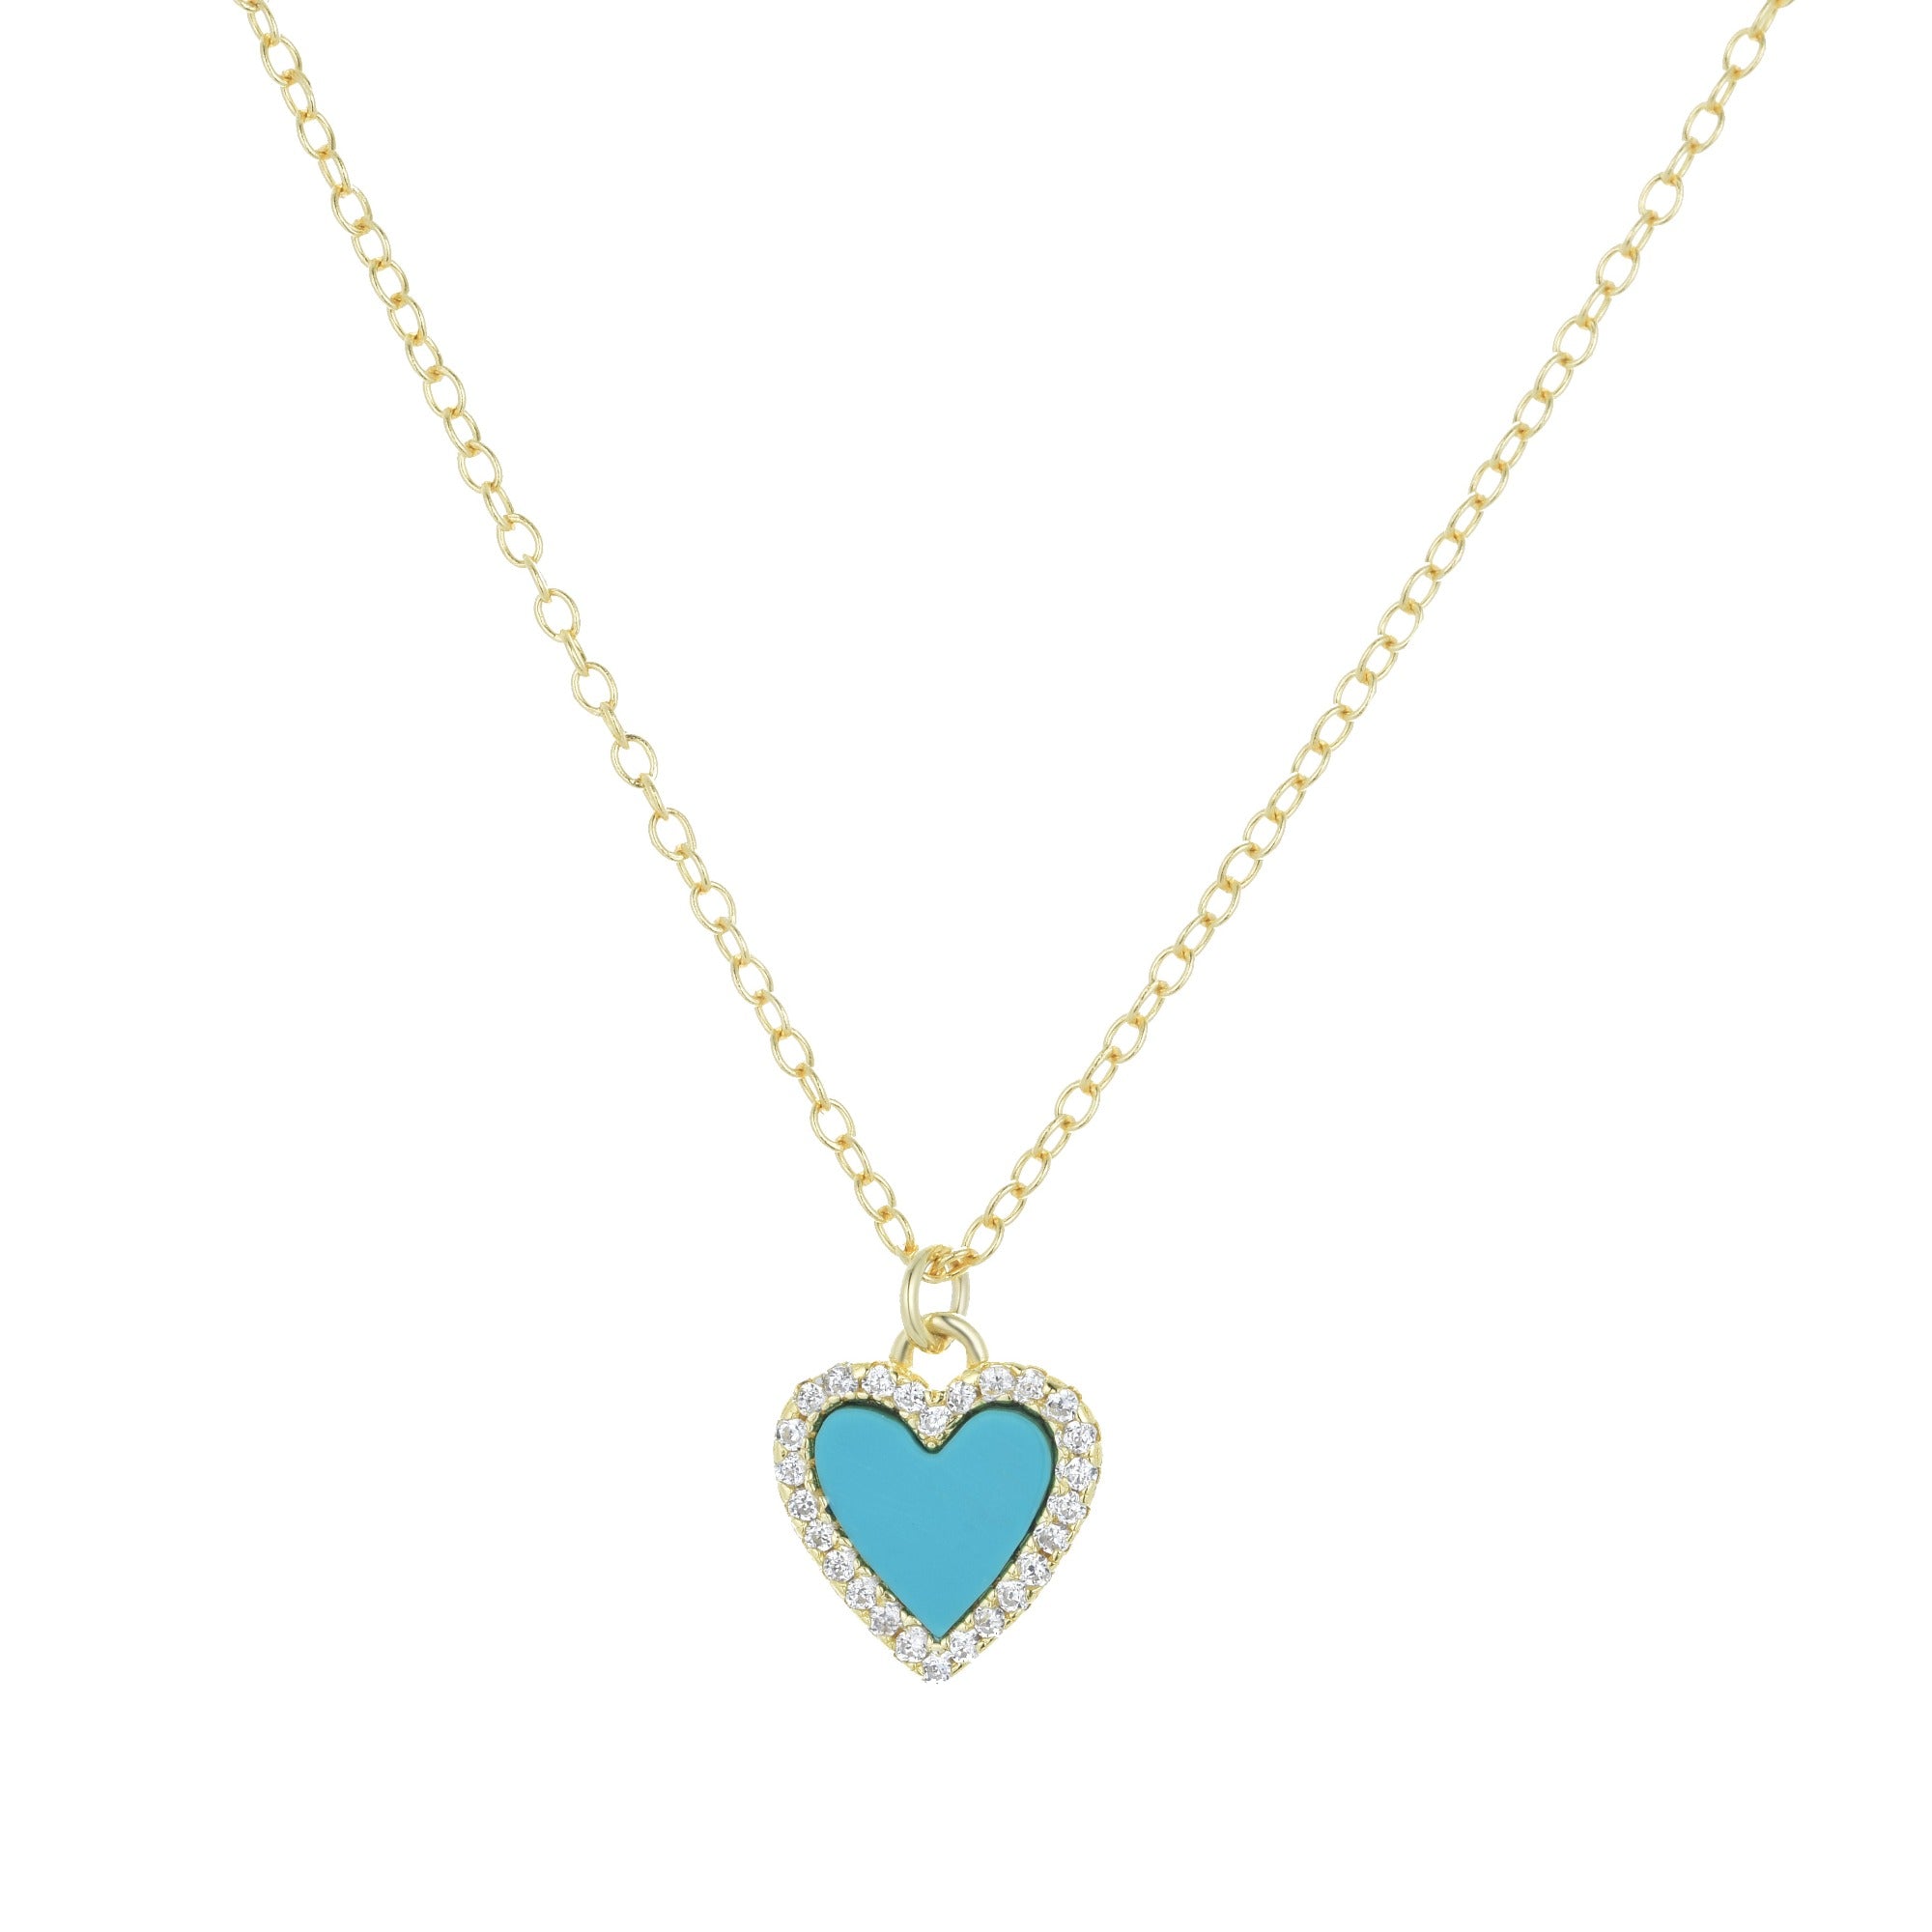 Tiffany S925 Enamel Heart Bow Necklace Luxury Designer Jewelry For  Weddings, Engagement & Gift From Dhgatepp, $19.21 | DHgate.Com